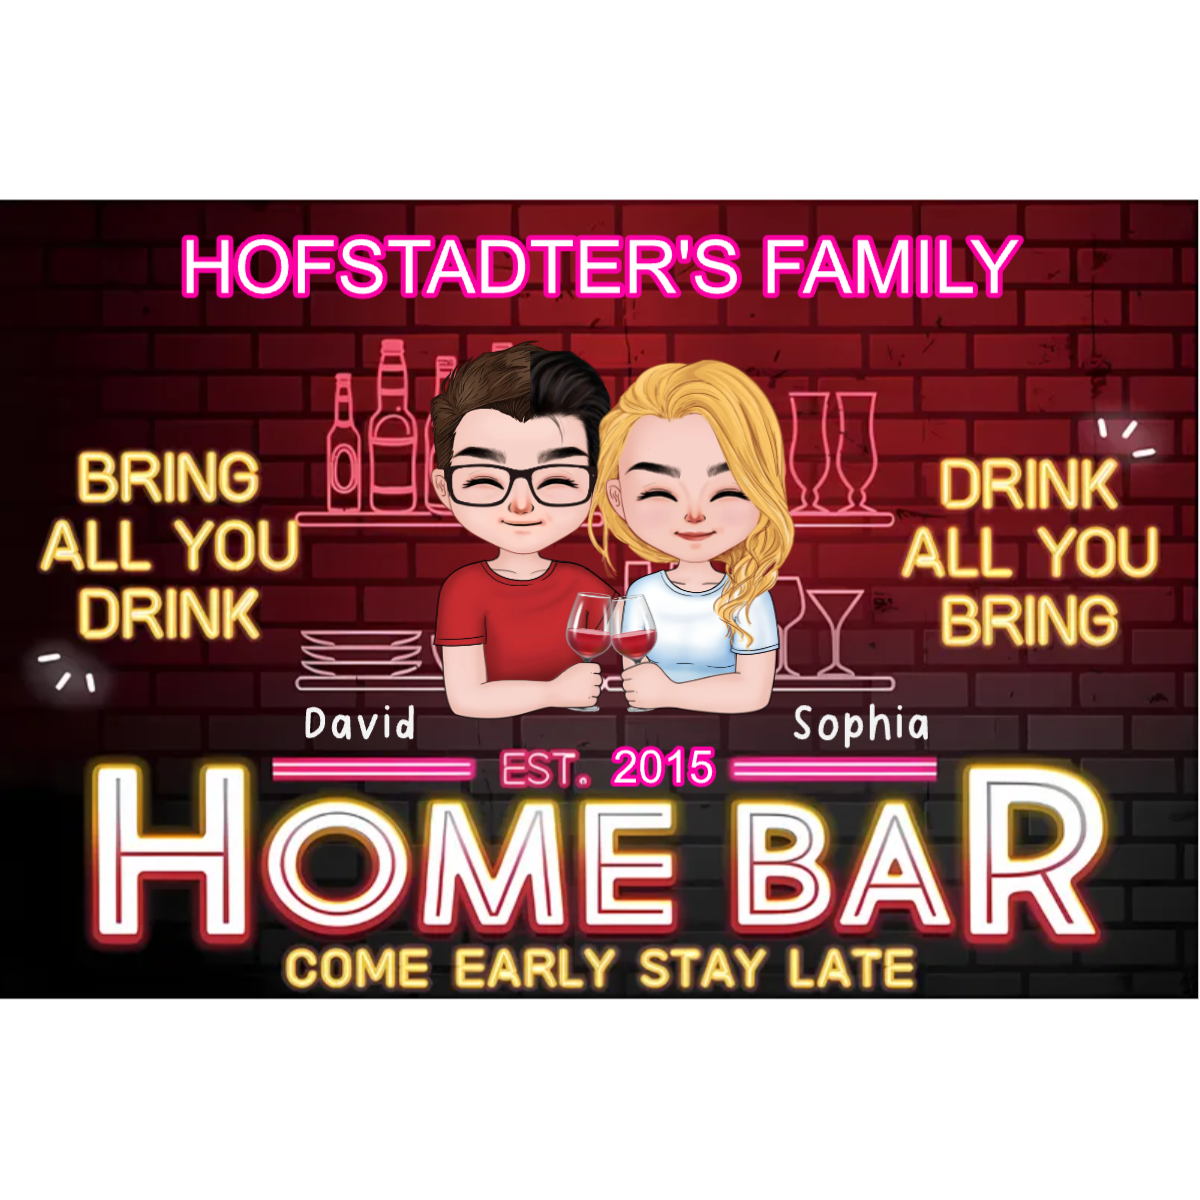 Home Bar - Come Early & Stay Late: Bring All You Drink & Drink All You Bring - Couple Husband Wife Personalized Classic Metal Sign, White